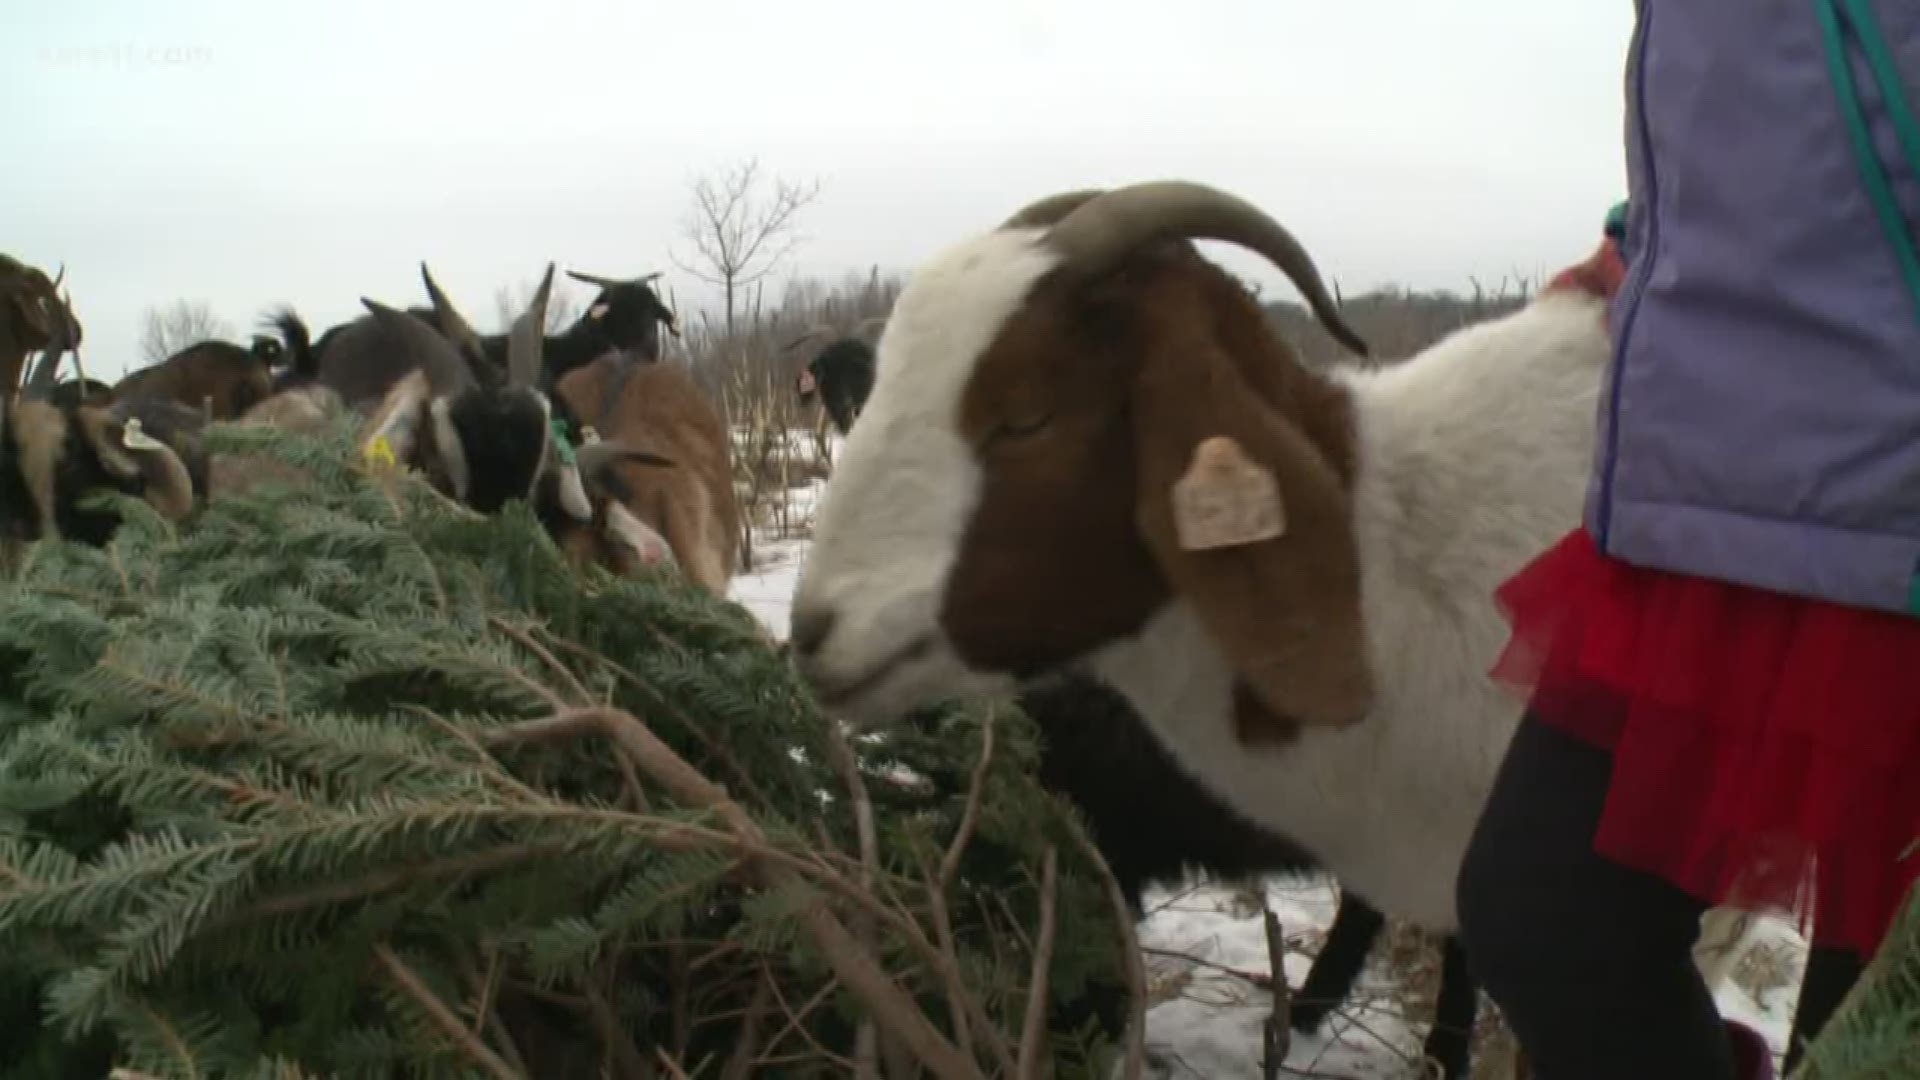 Goat Dispatch, a Minnesota goat grazing rental company, is looking for donations of Christmas trees to feed its flock.